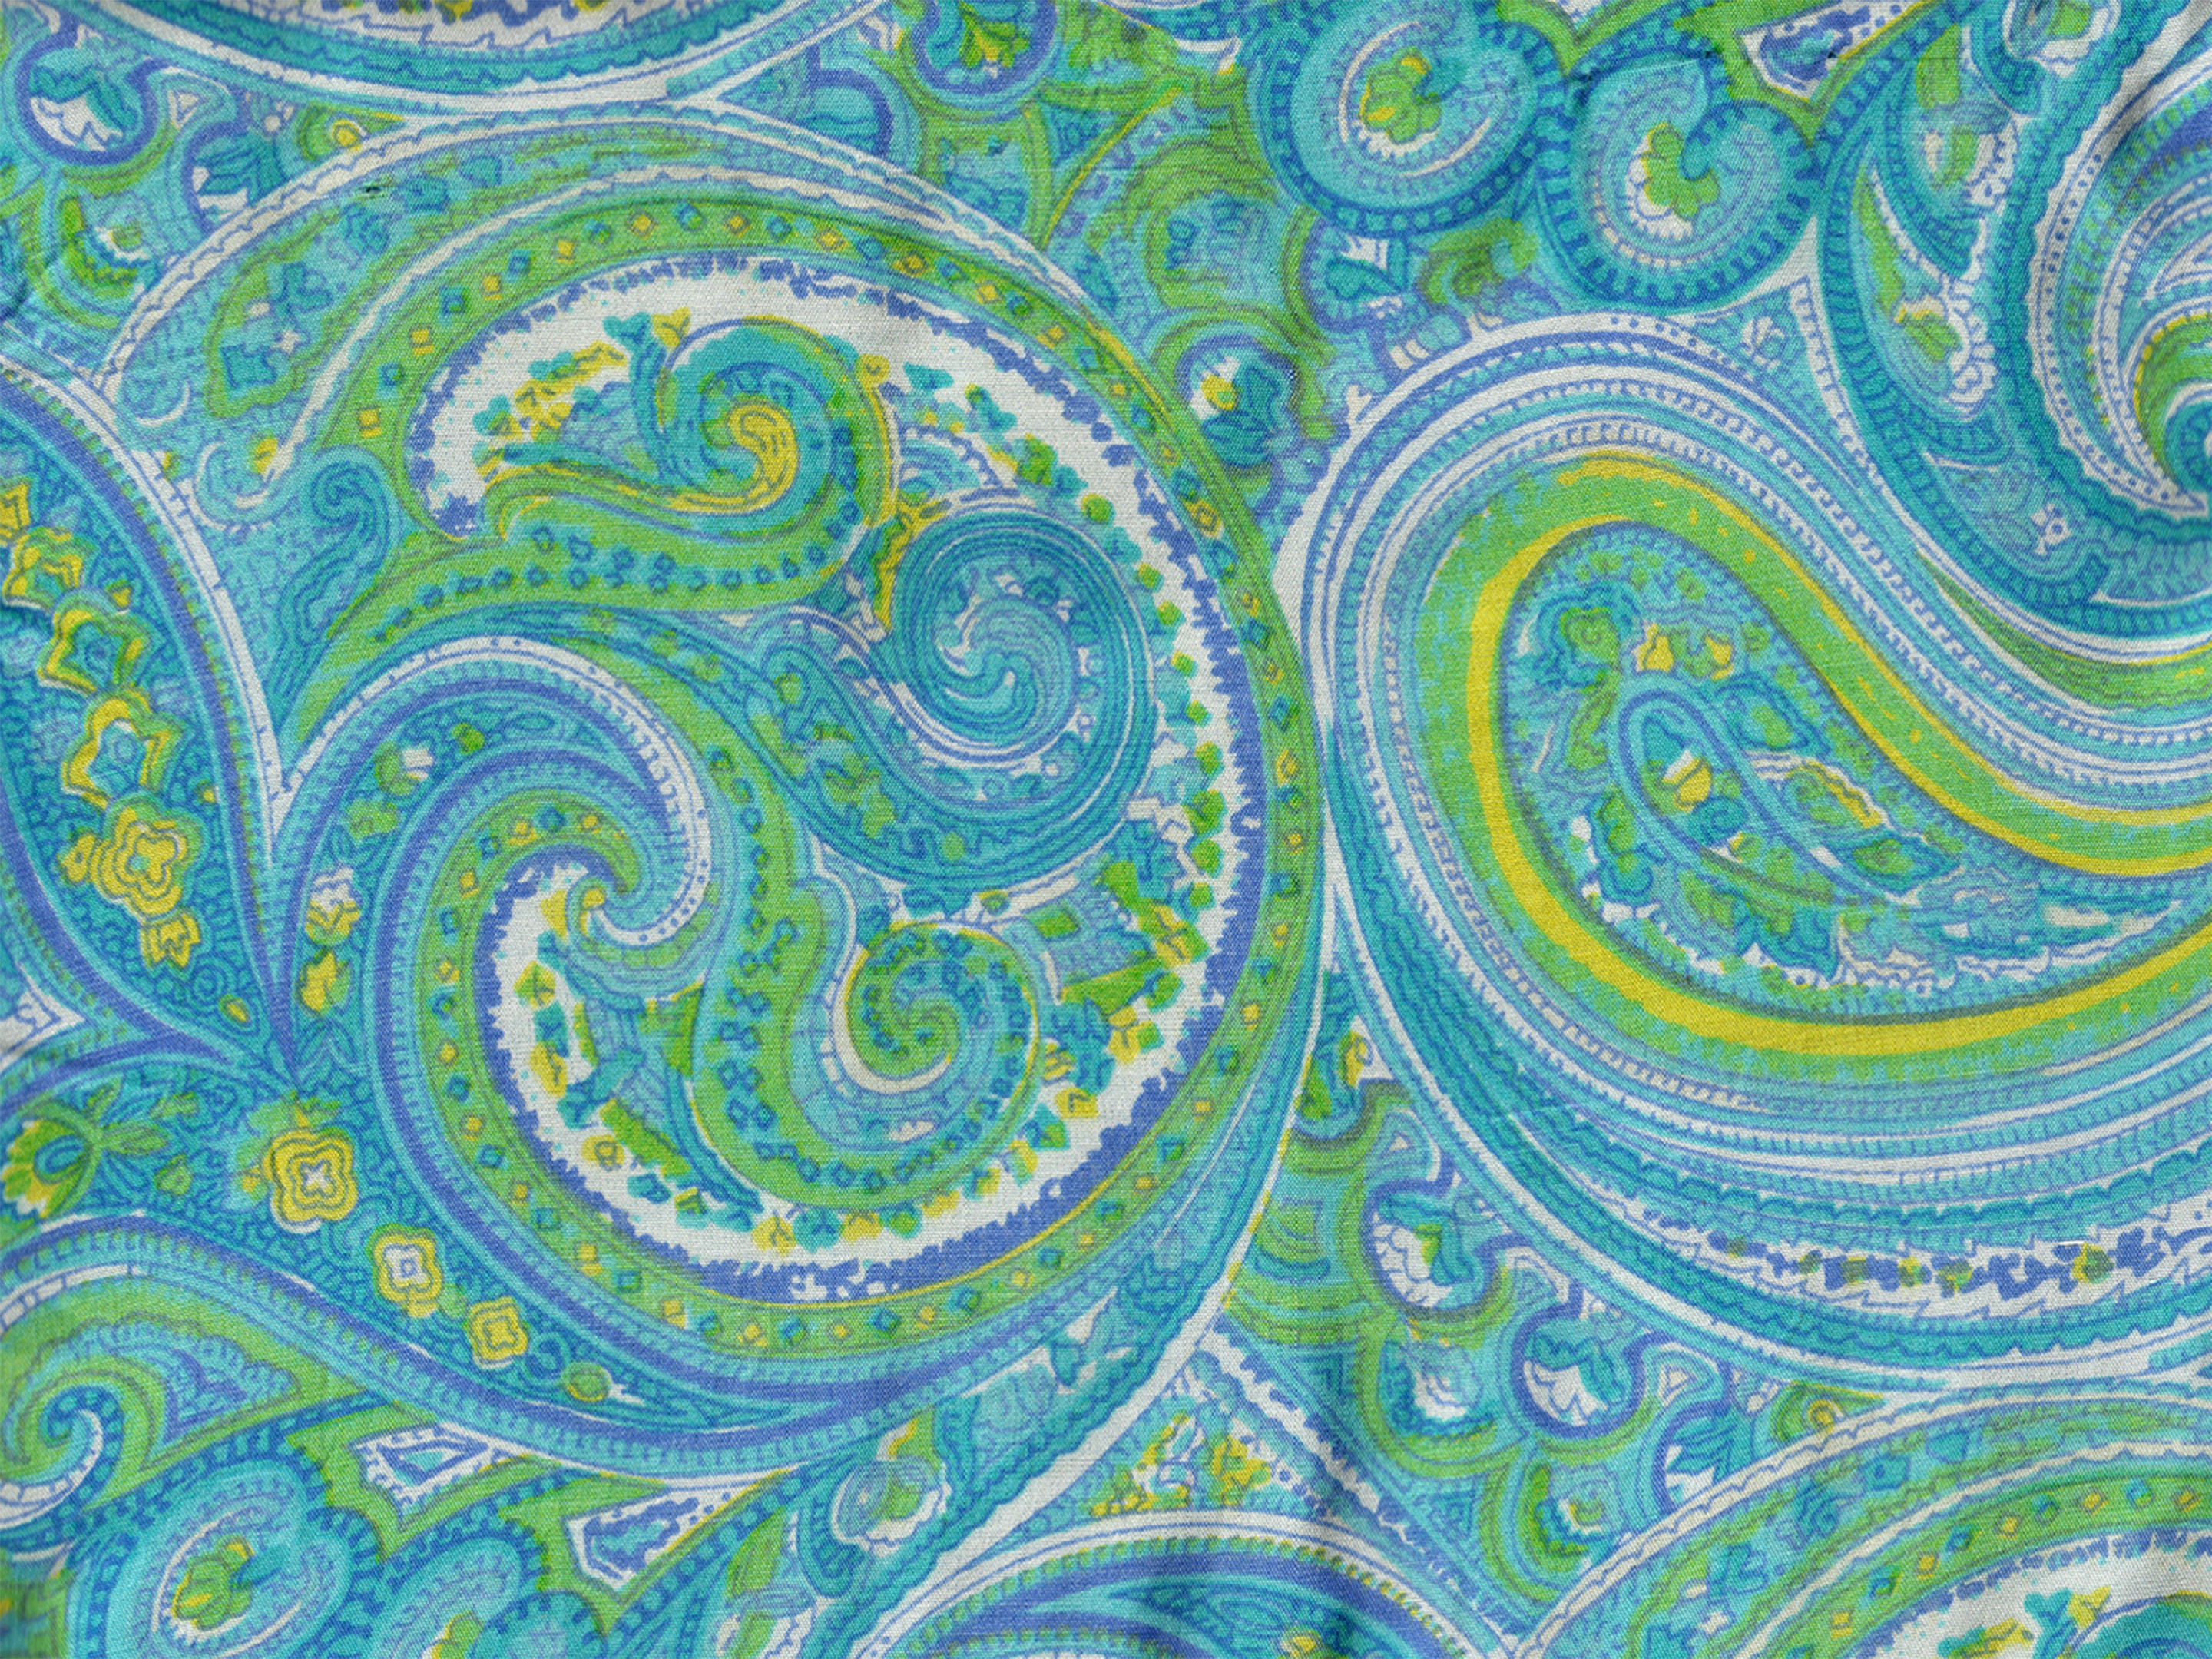 Green and blue paisley pattern